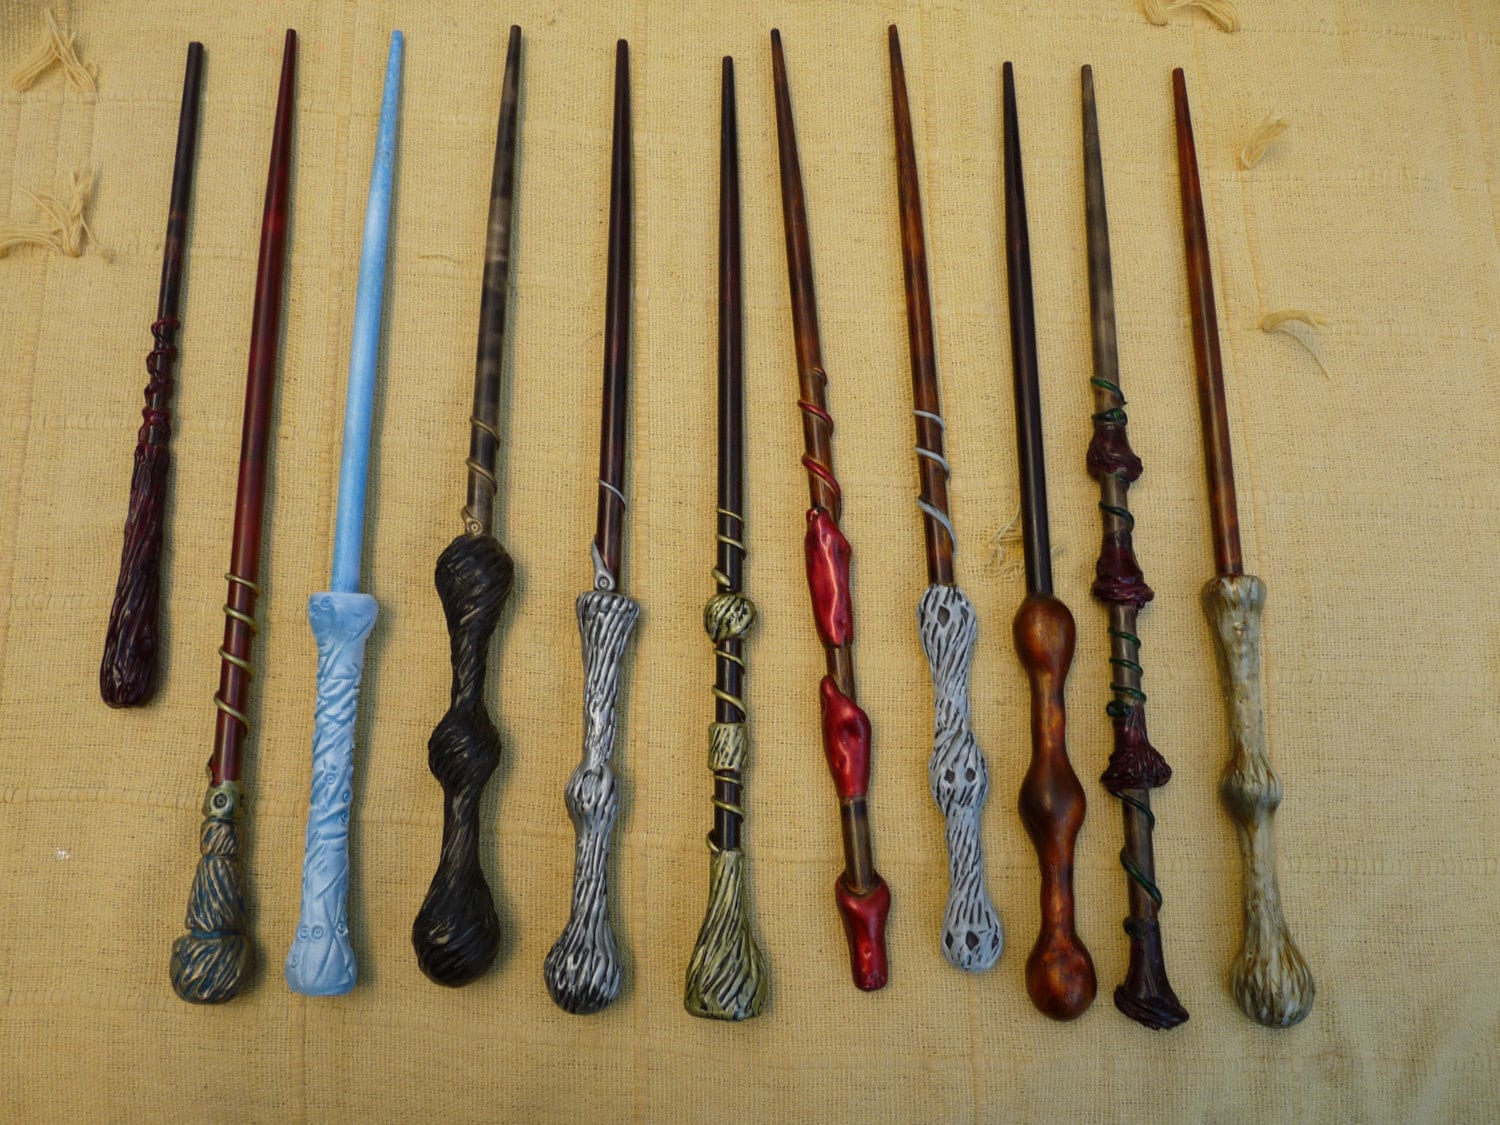 wands and witches